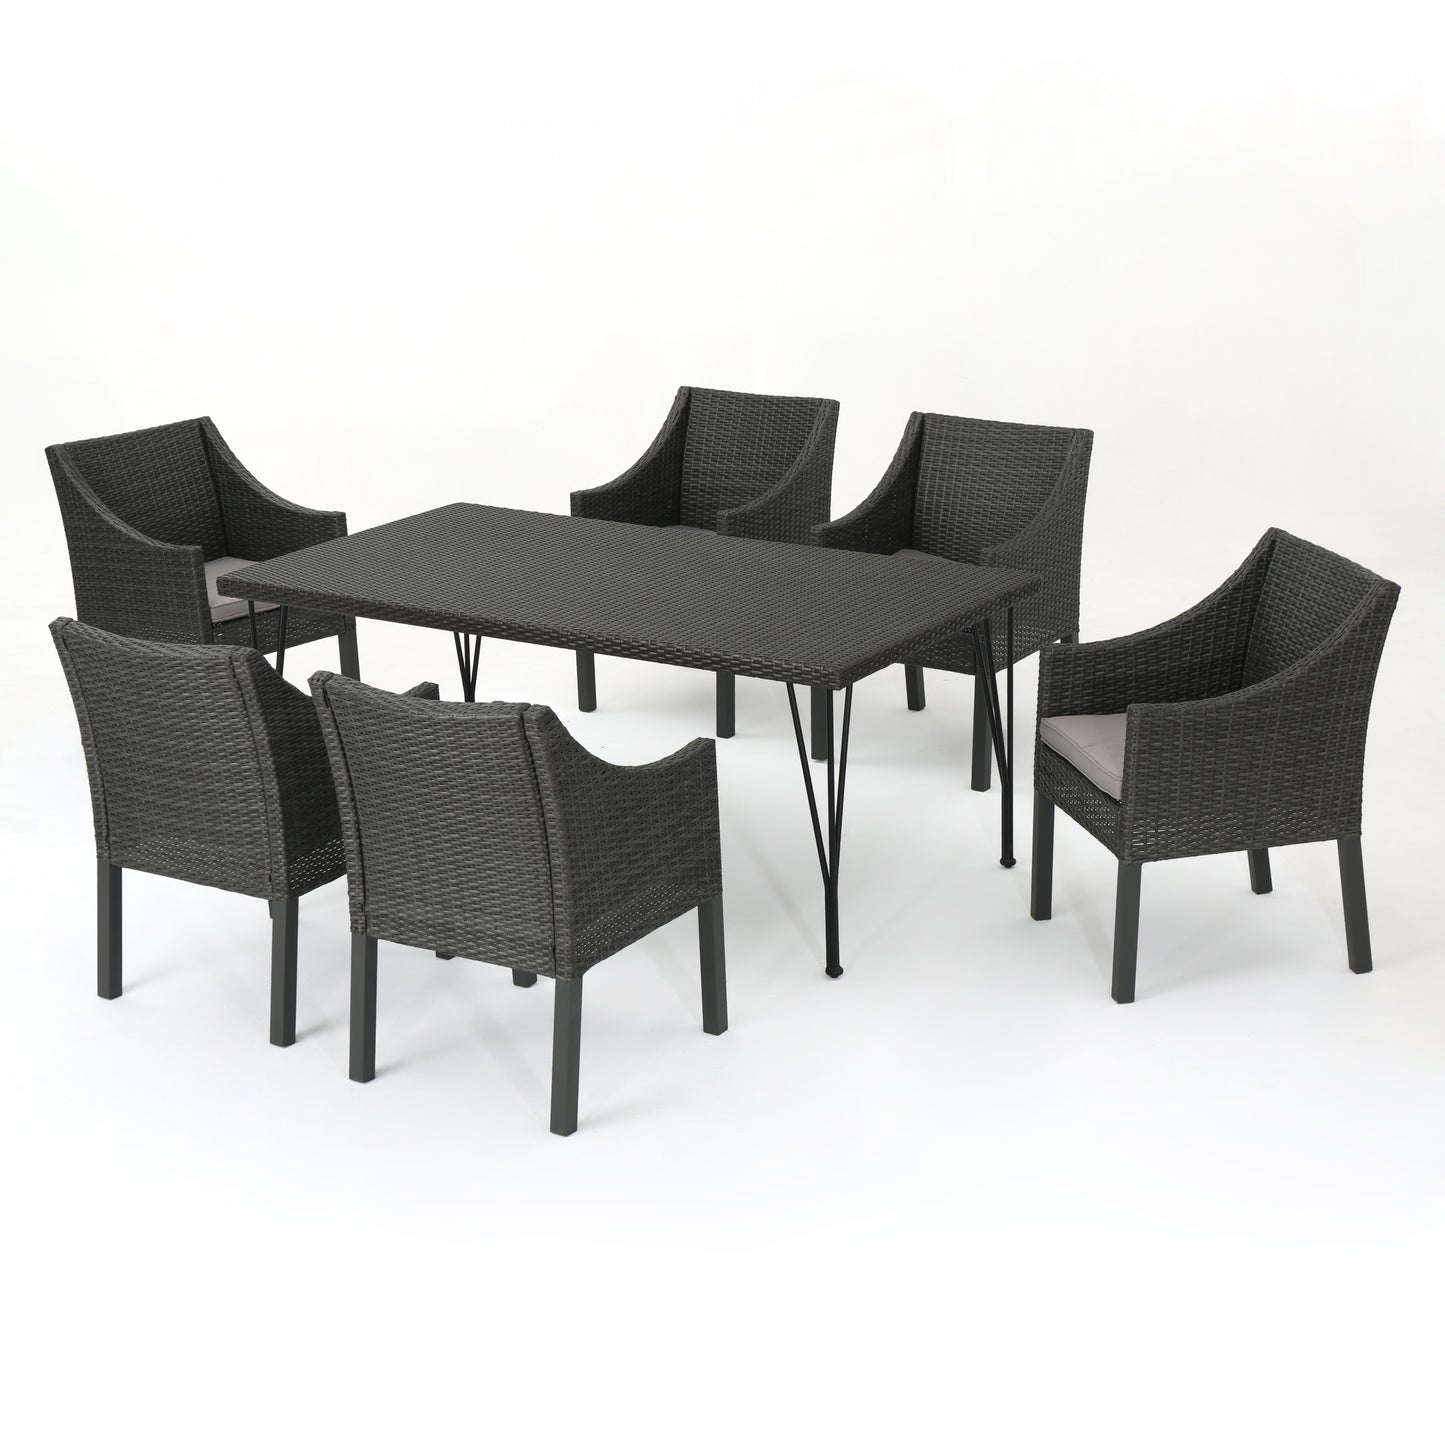 Georgia Outdoor 7 Piece Wicker Dining Set with Water Resistant Cushions